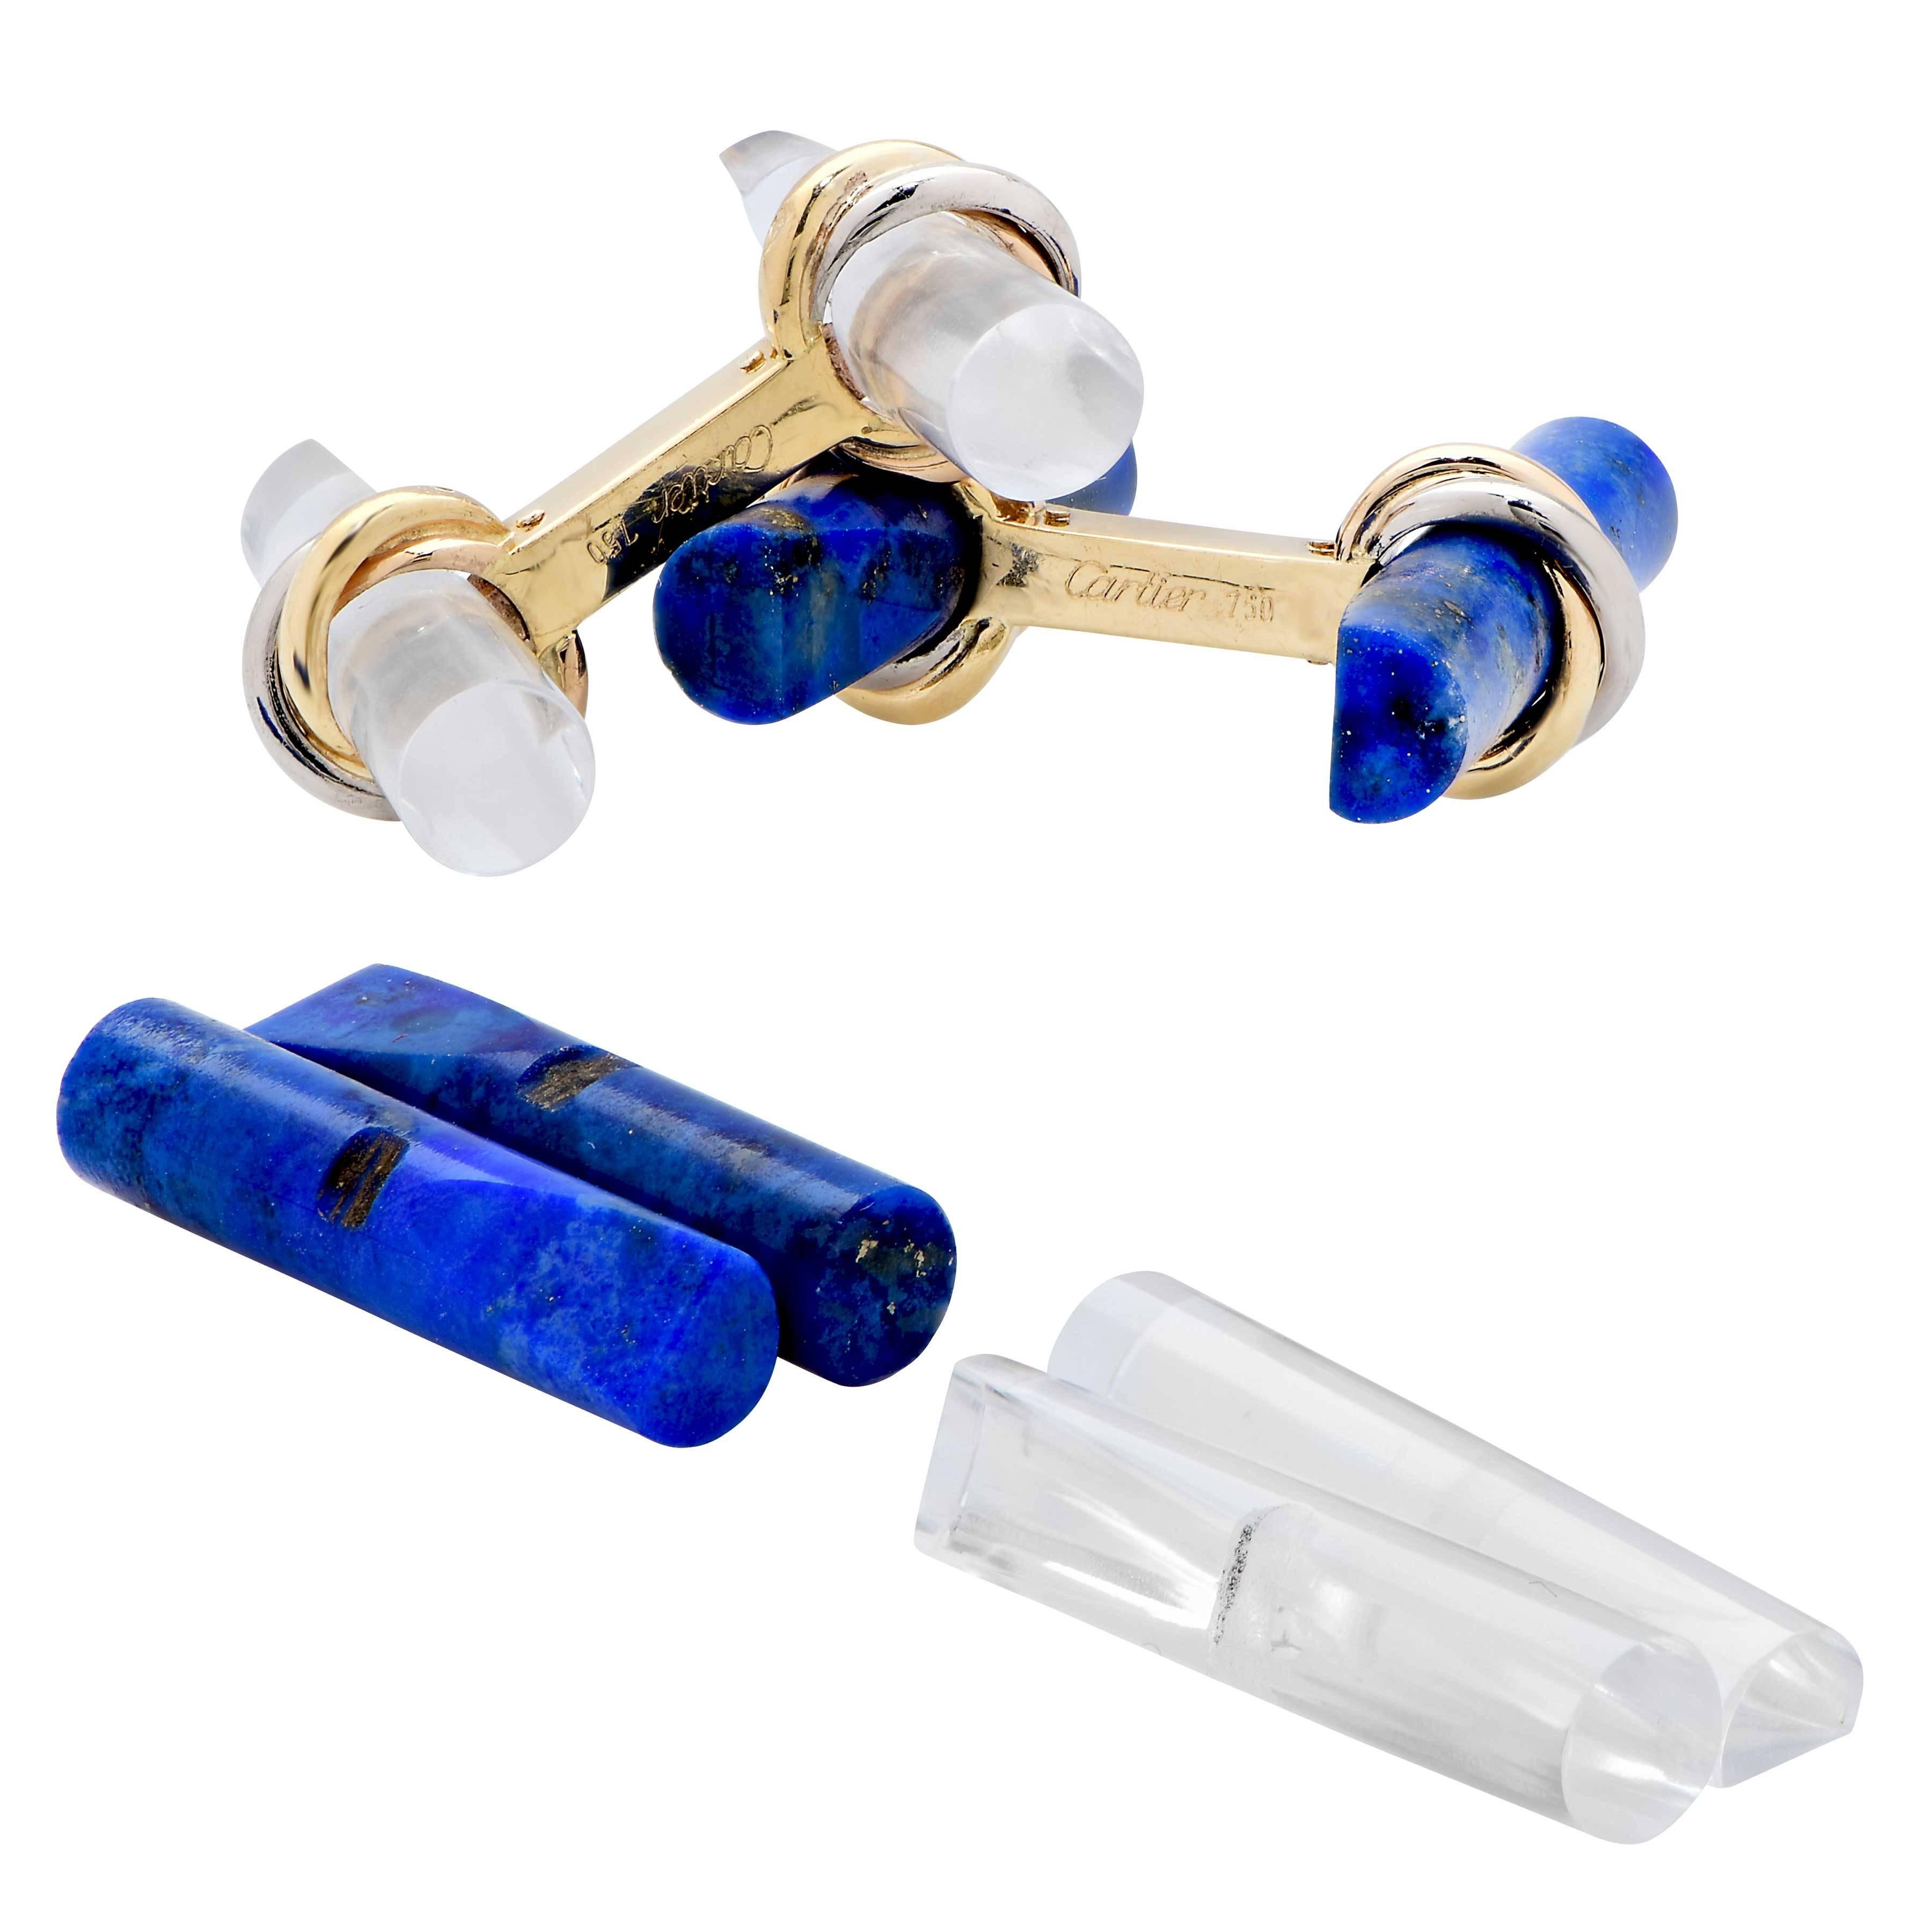 Cartier Trinity 1960's 18 Karat Yellow Gold Cuff Links with interchangeable bars and accessory kits. These cuff links were originally purchased without the accessory kit and the kit containing four sets, Lapis Lazuli, Malachite, Rock Chrystal, and